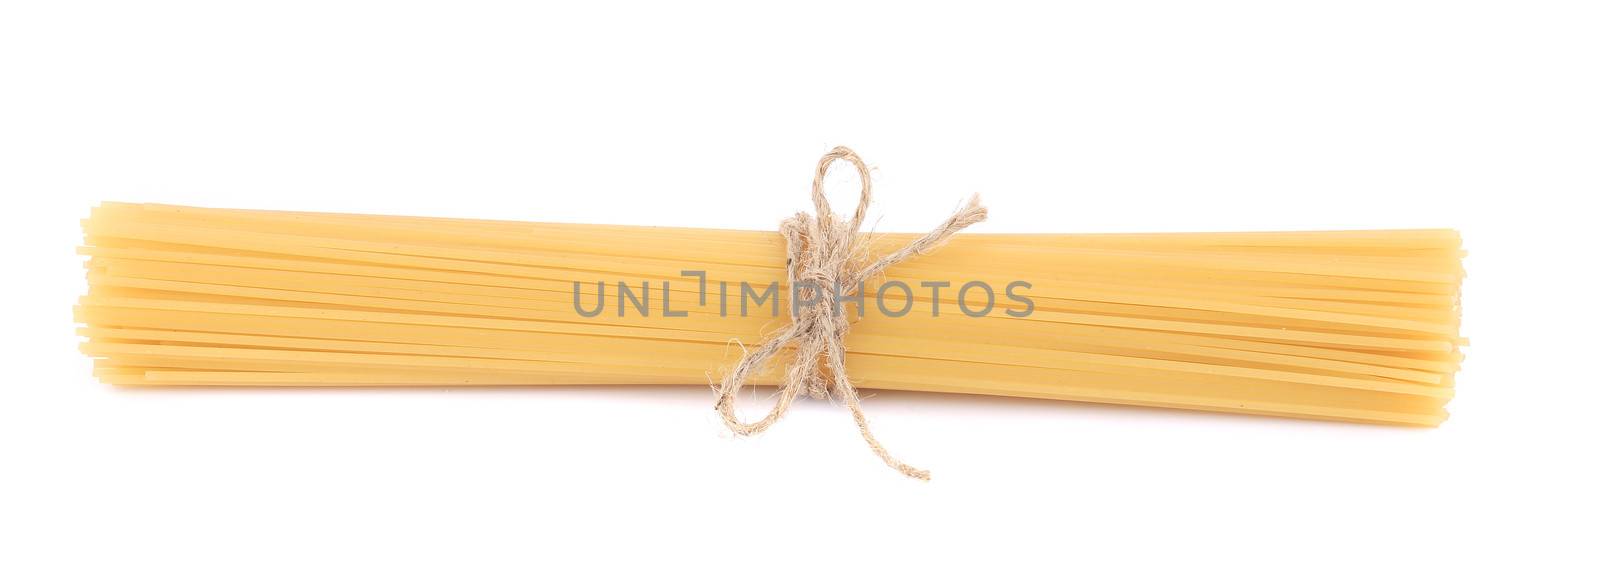 Bunch of Italian pasta spaghetti. Isolated on a white background.